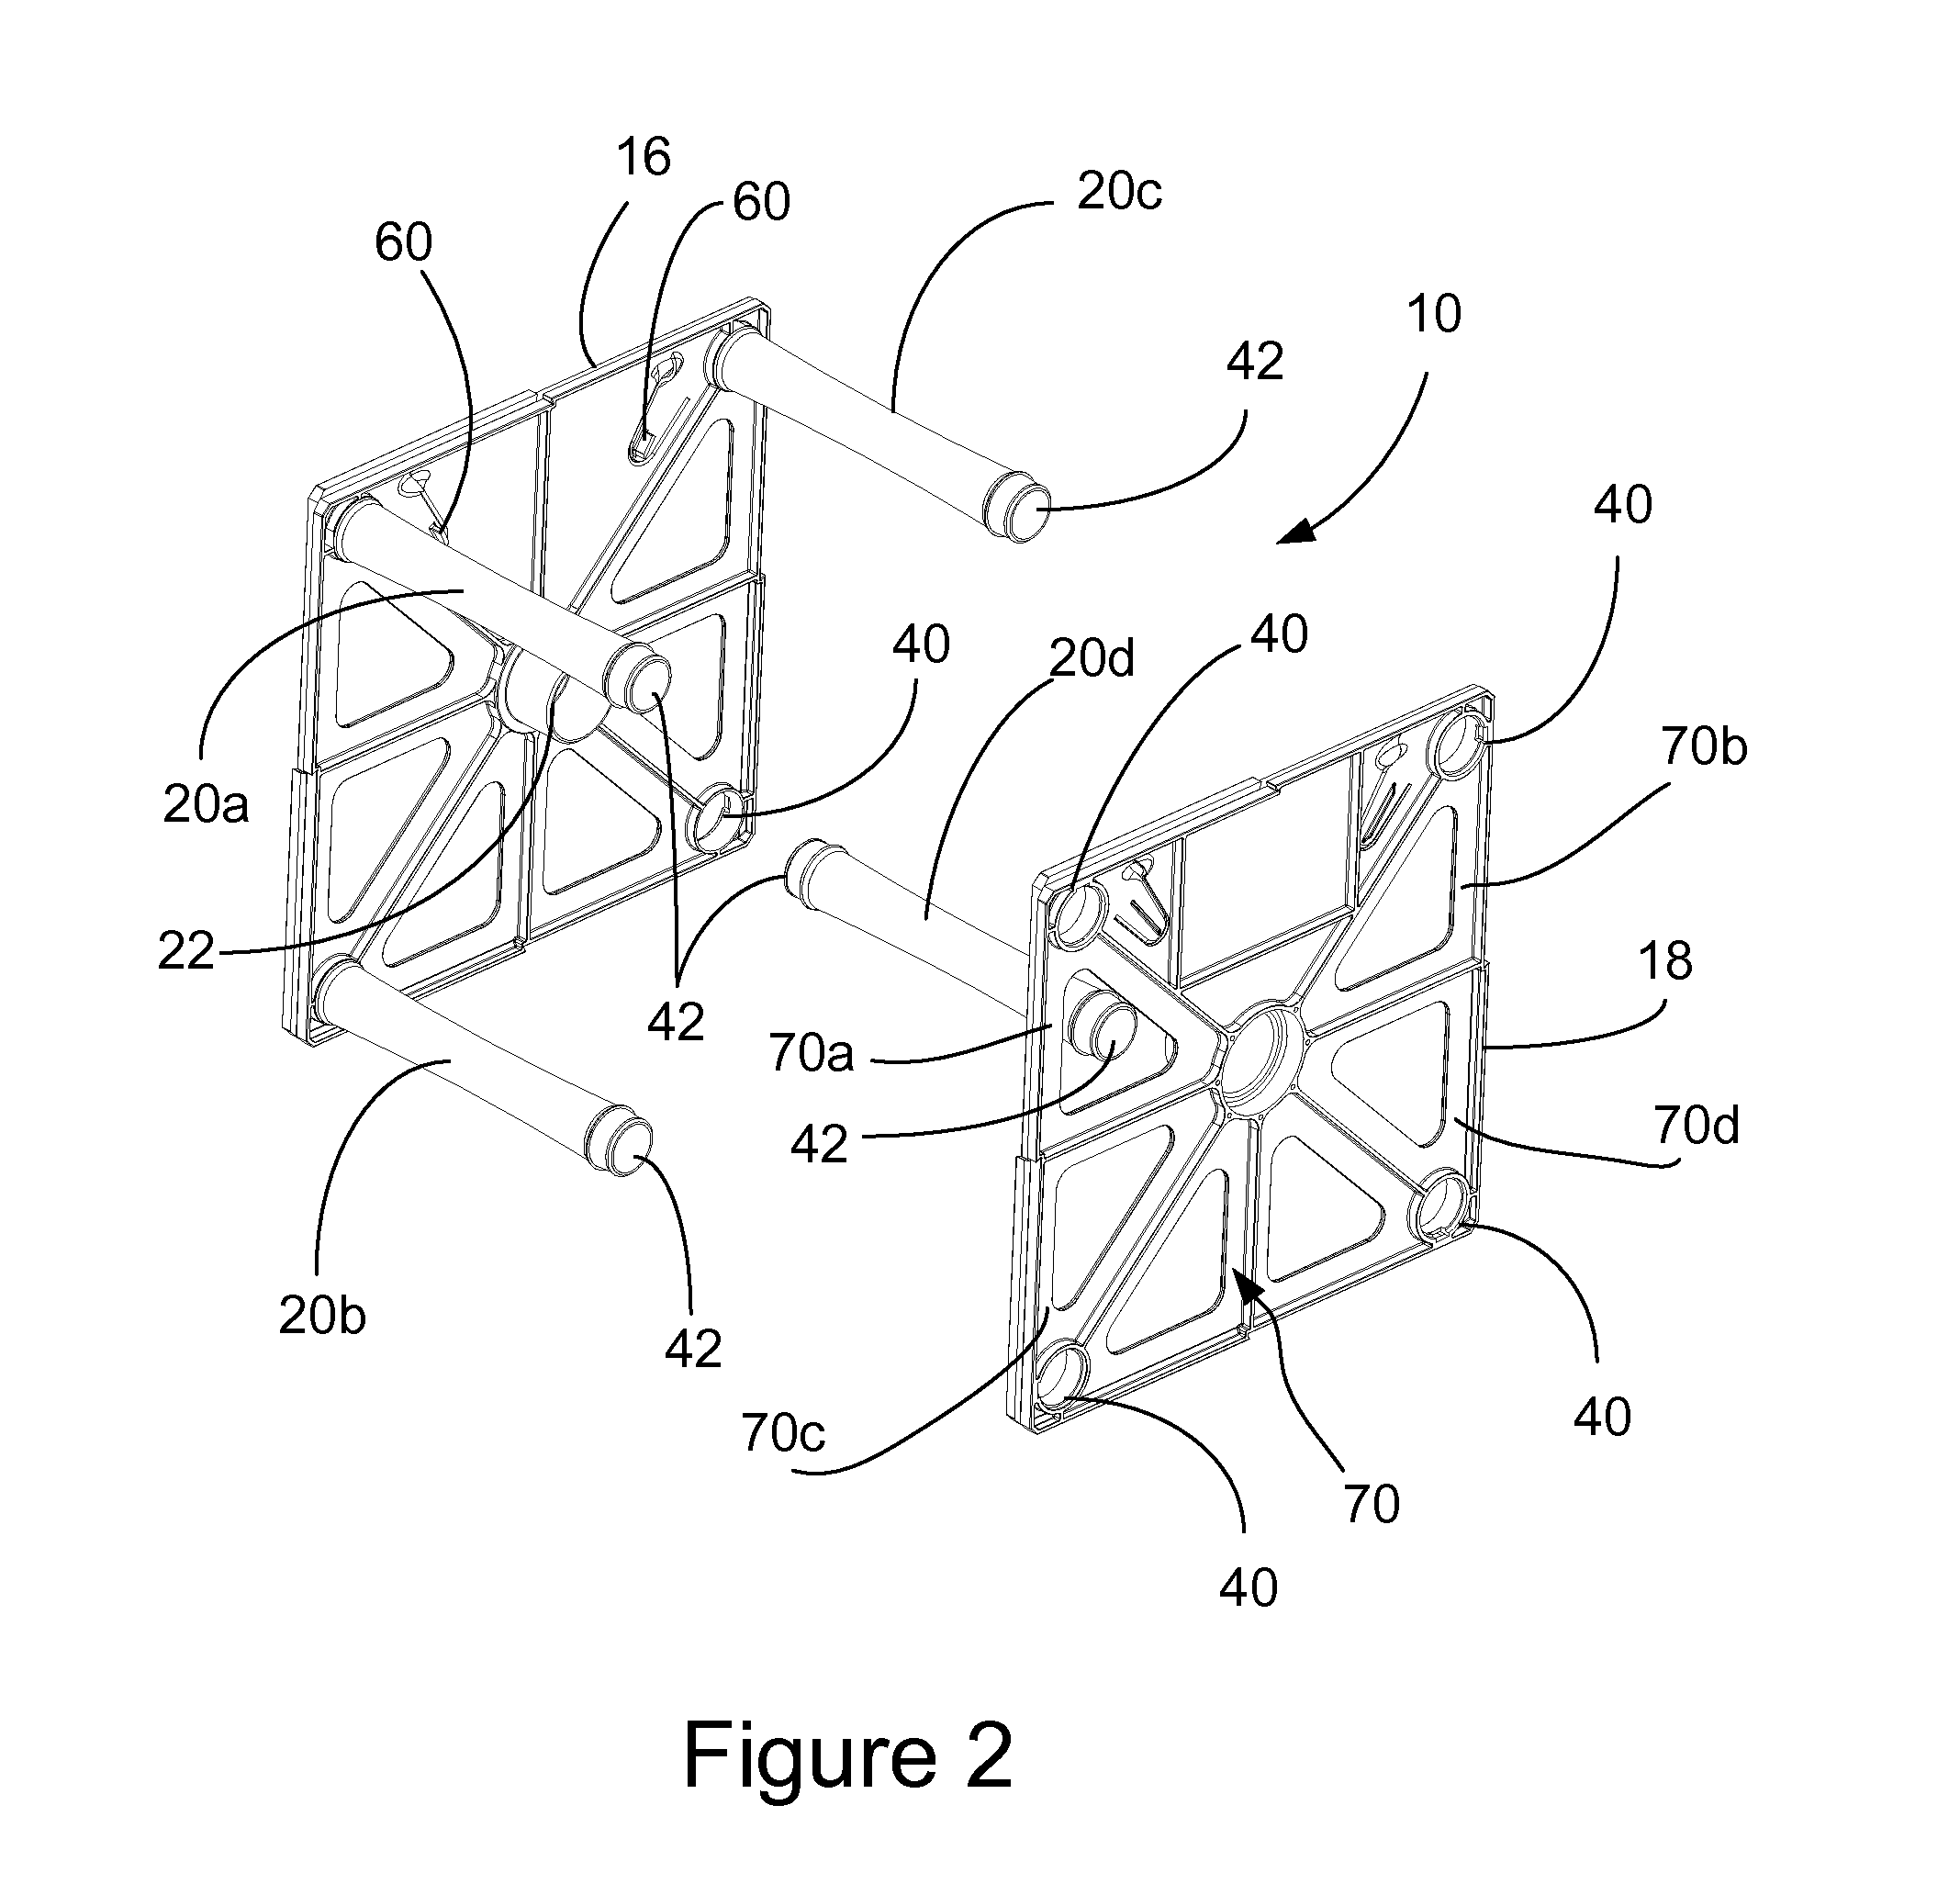 Device for dispensing a telecommunication cable from a reel